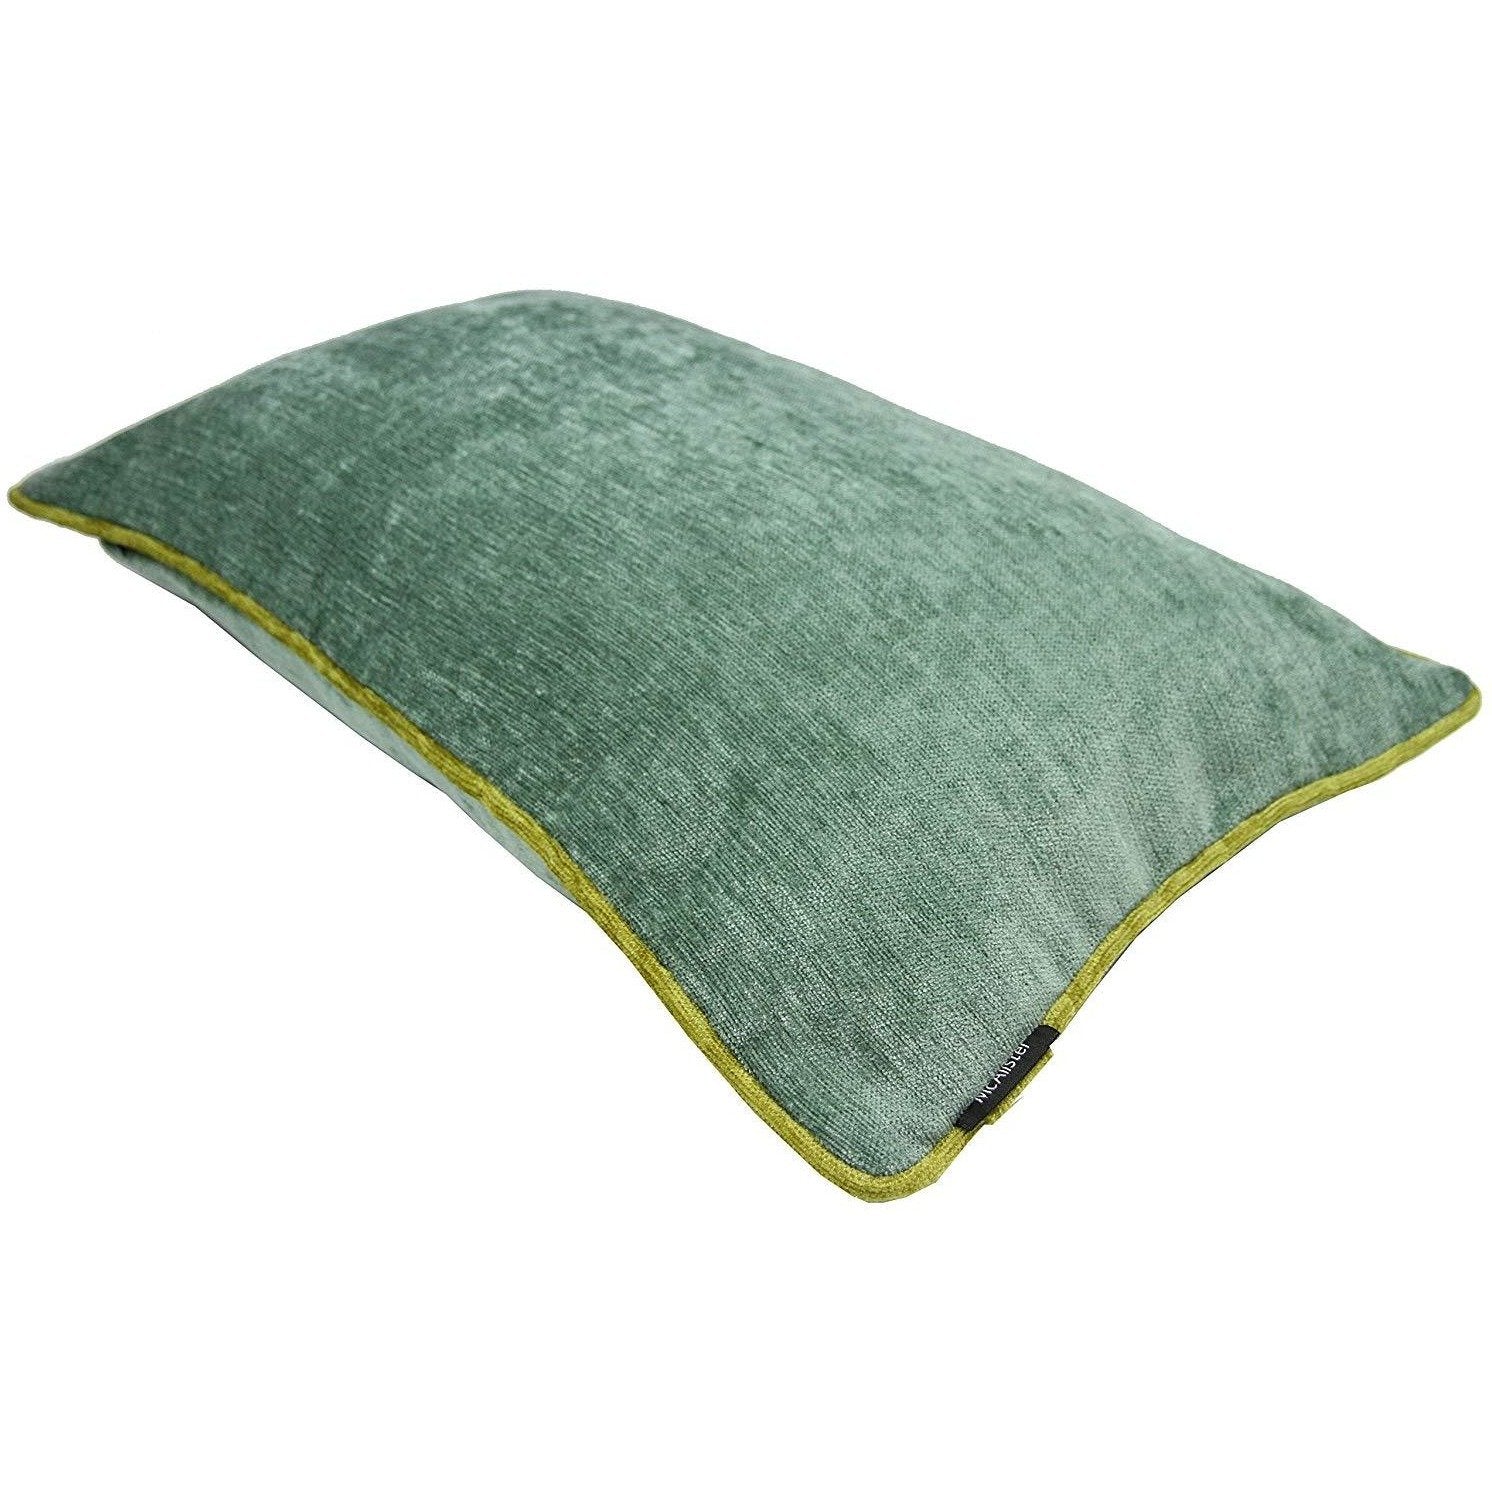 McAlister Textiles Alston Chenille Duck Egg Blue + Green Cushion Cushions and Covers 